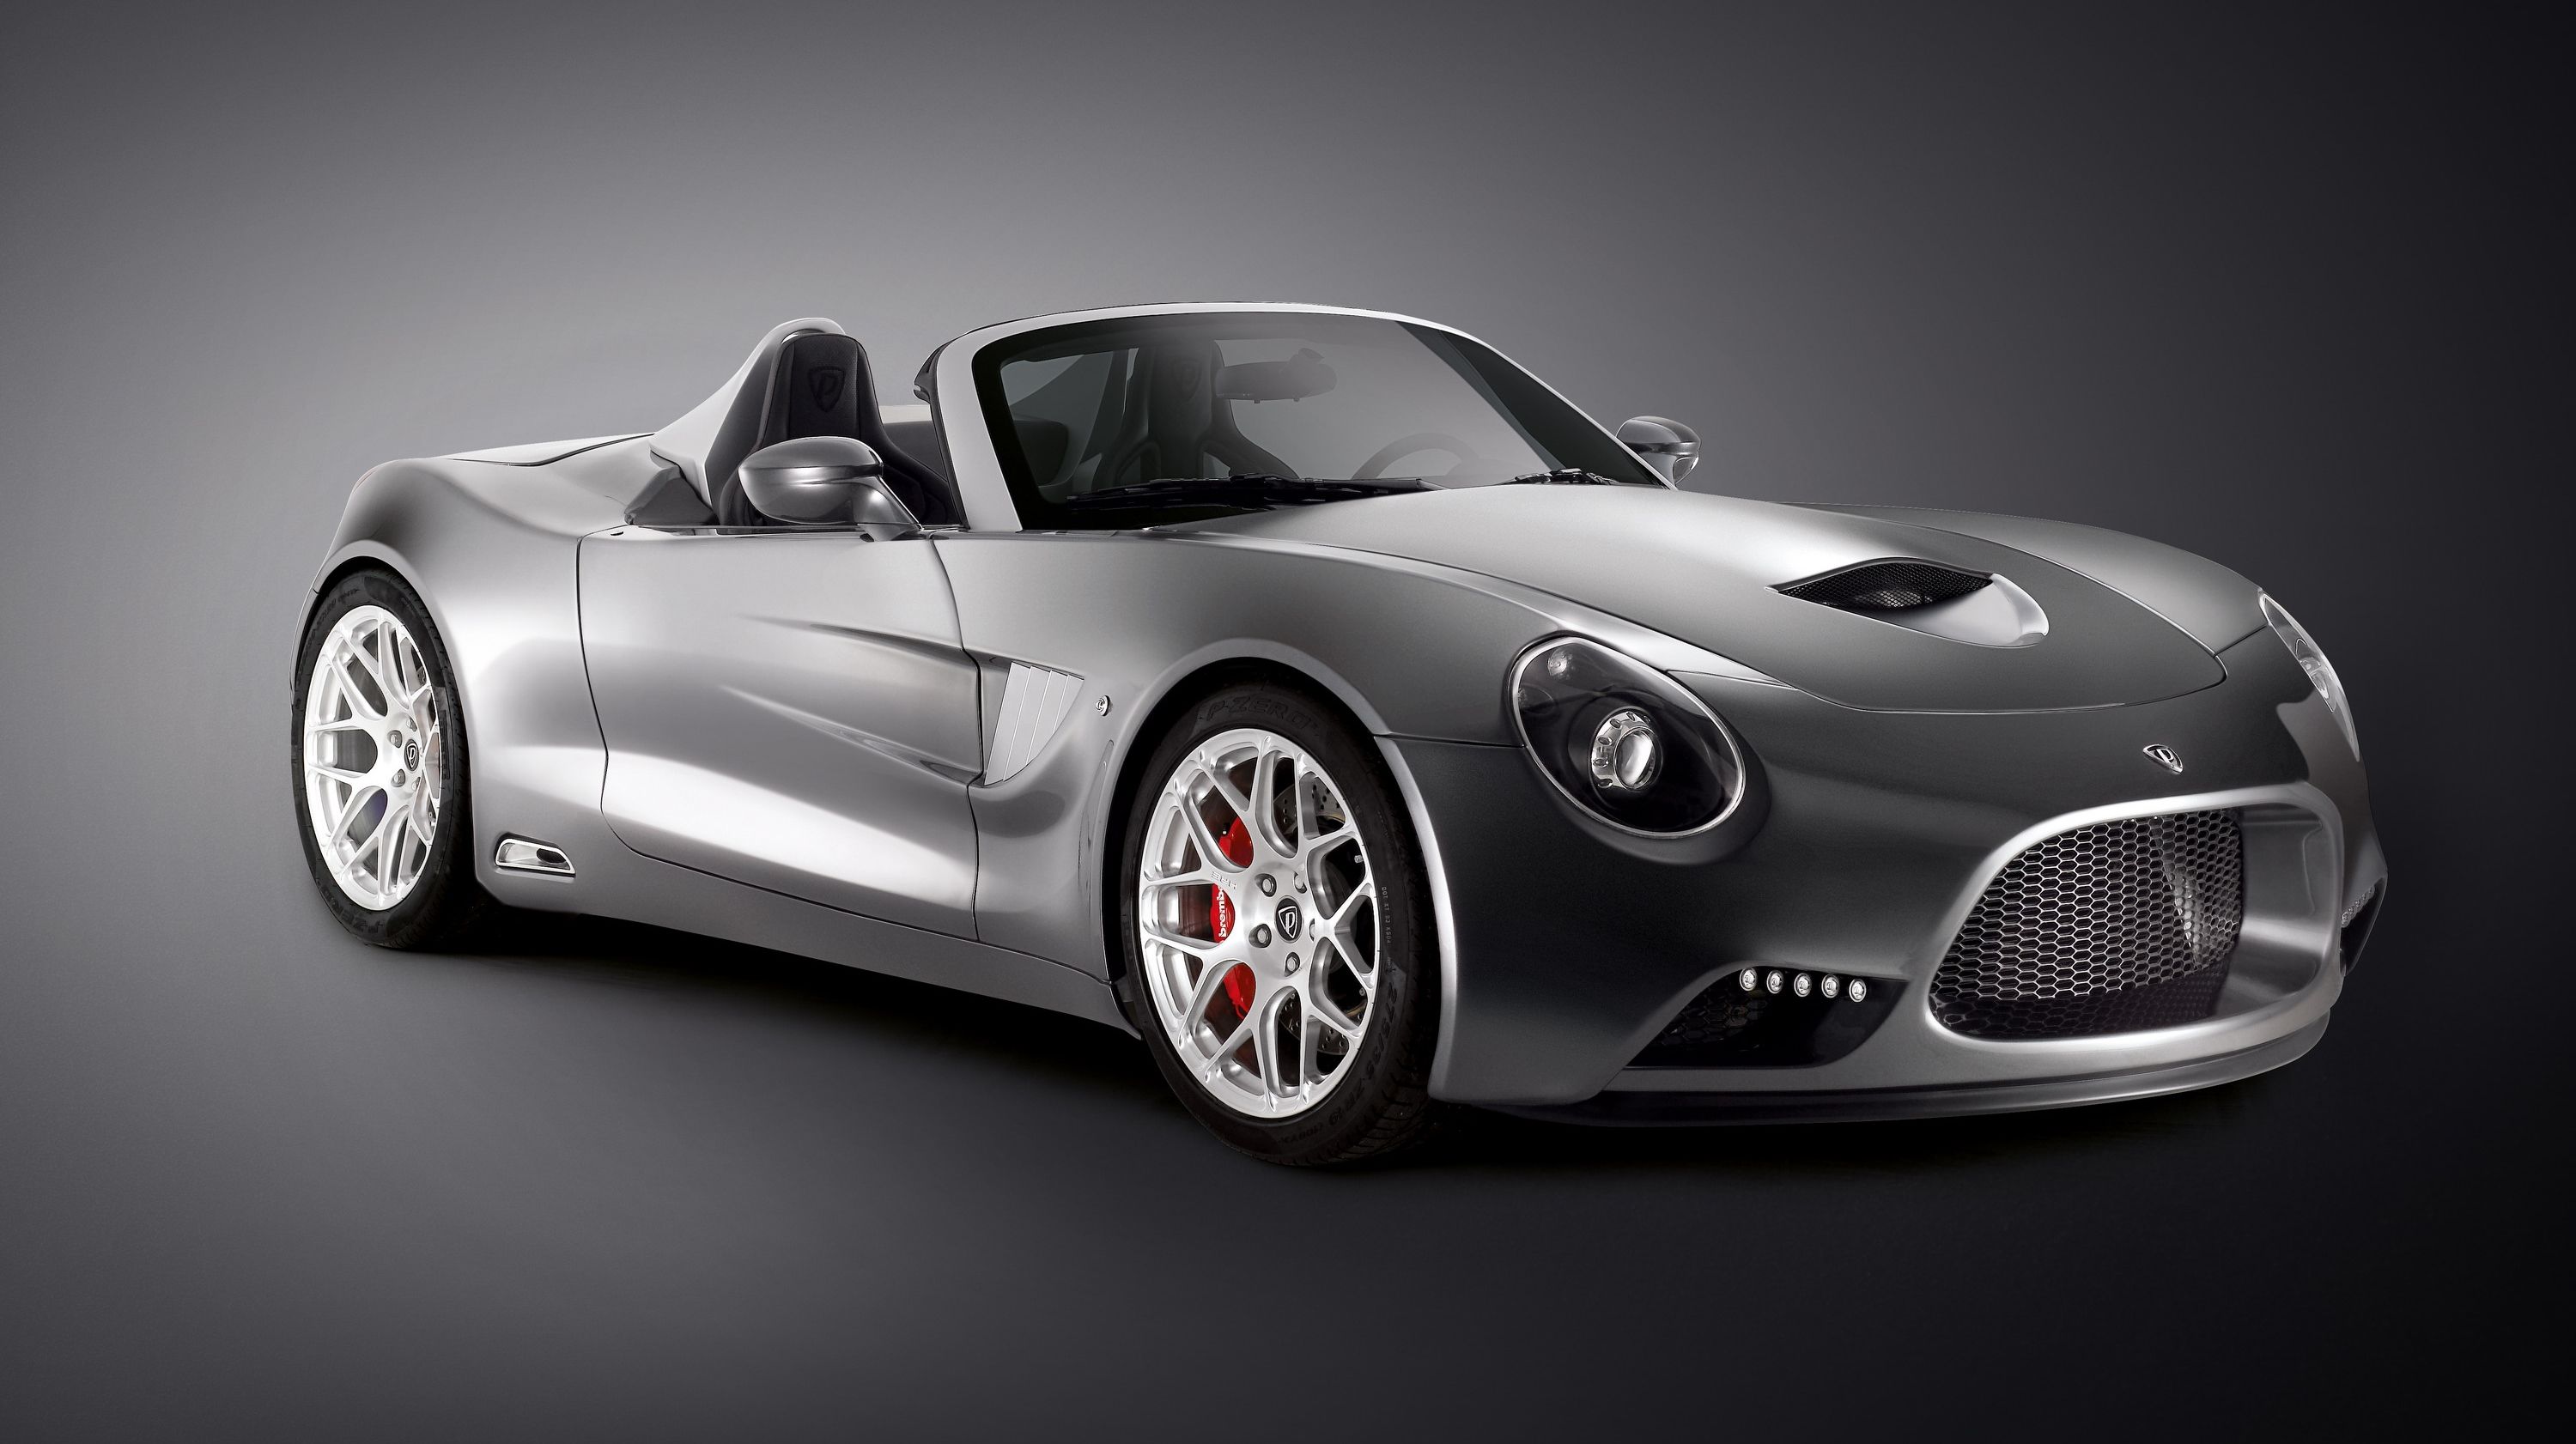  Meet the Puritalia 427; the latest niche sports car that will try to beat the odds and make it to production. Read all about it at TopSpeed.com.